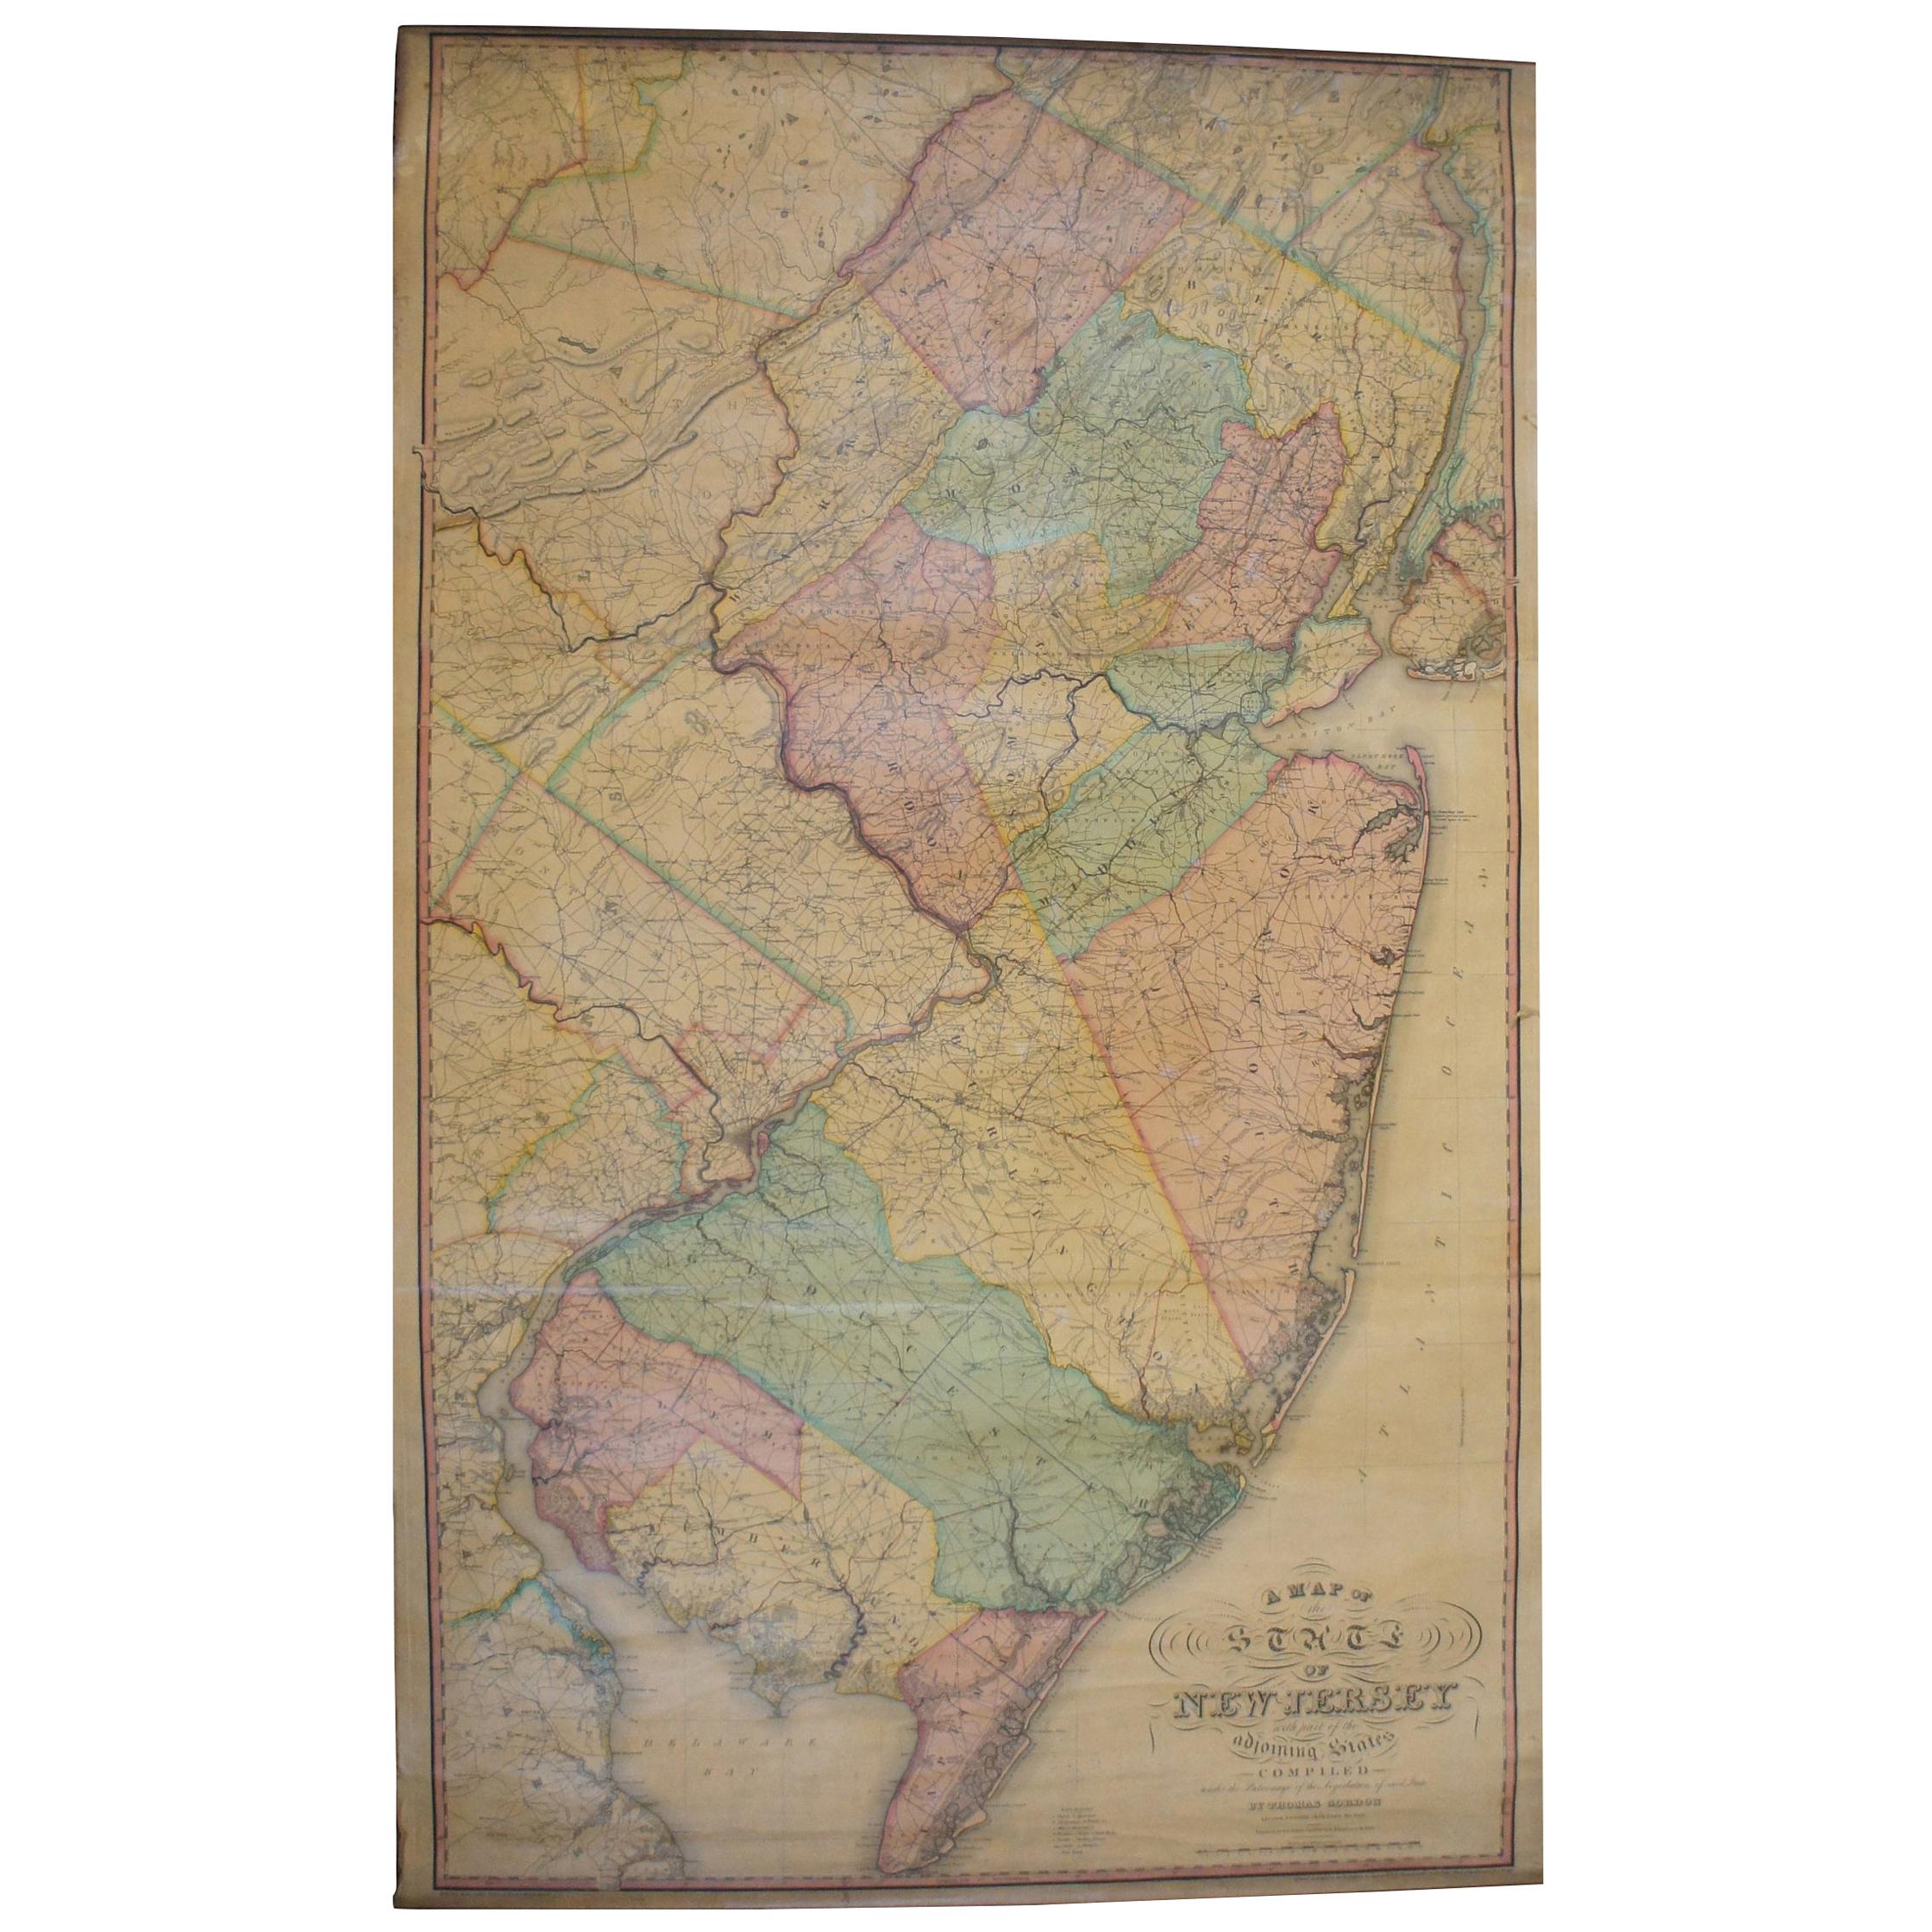 Antique 1833 Thomas Gordon Map of The State of New Jersey H.S. Tanner